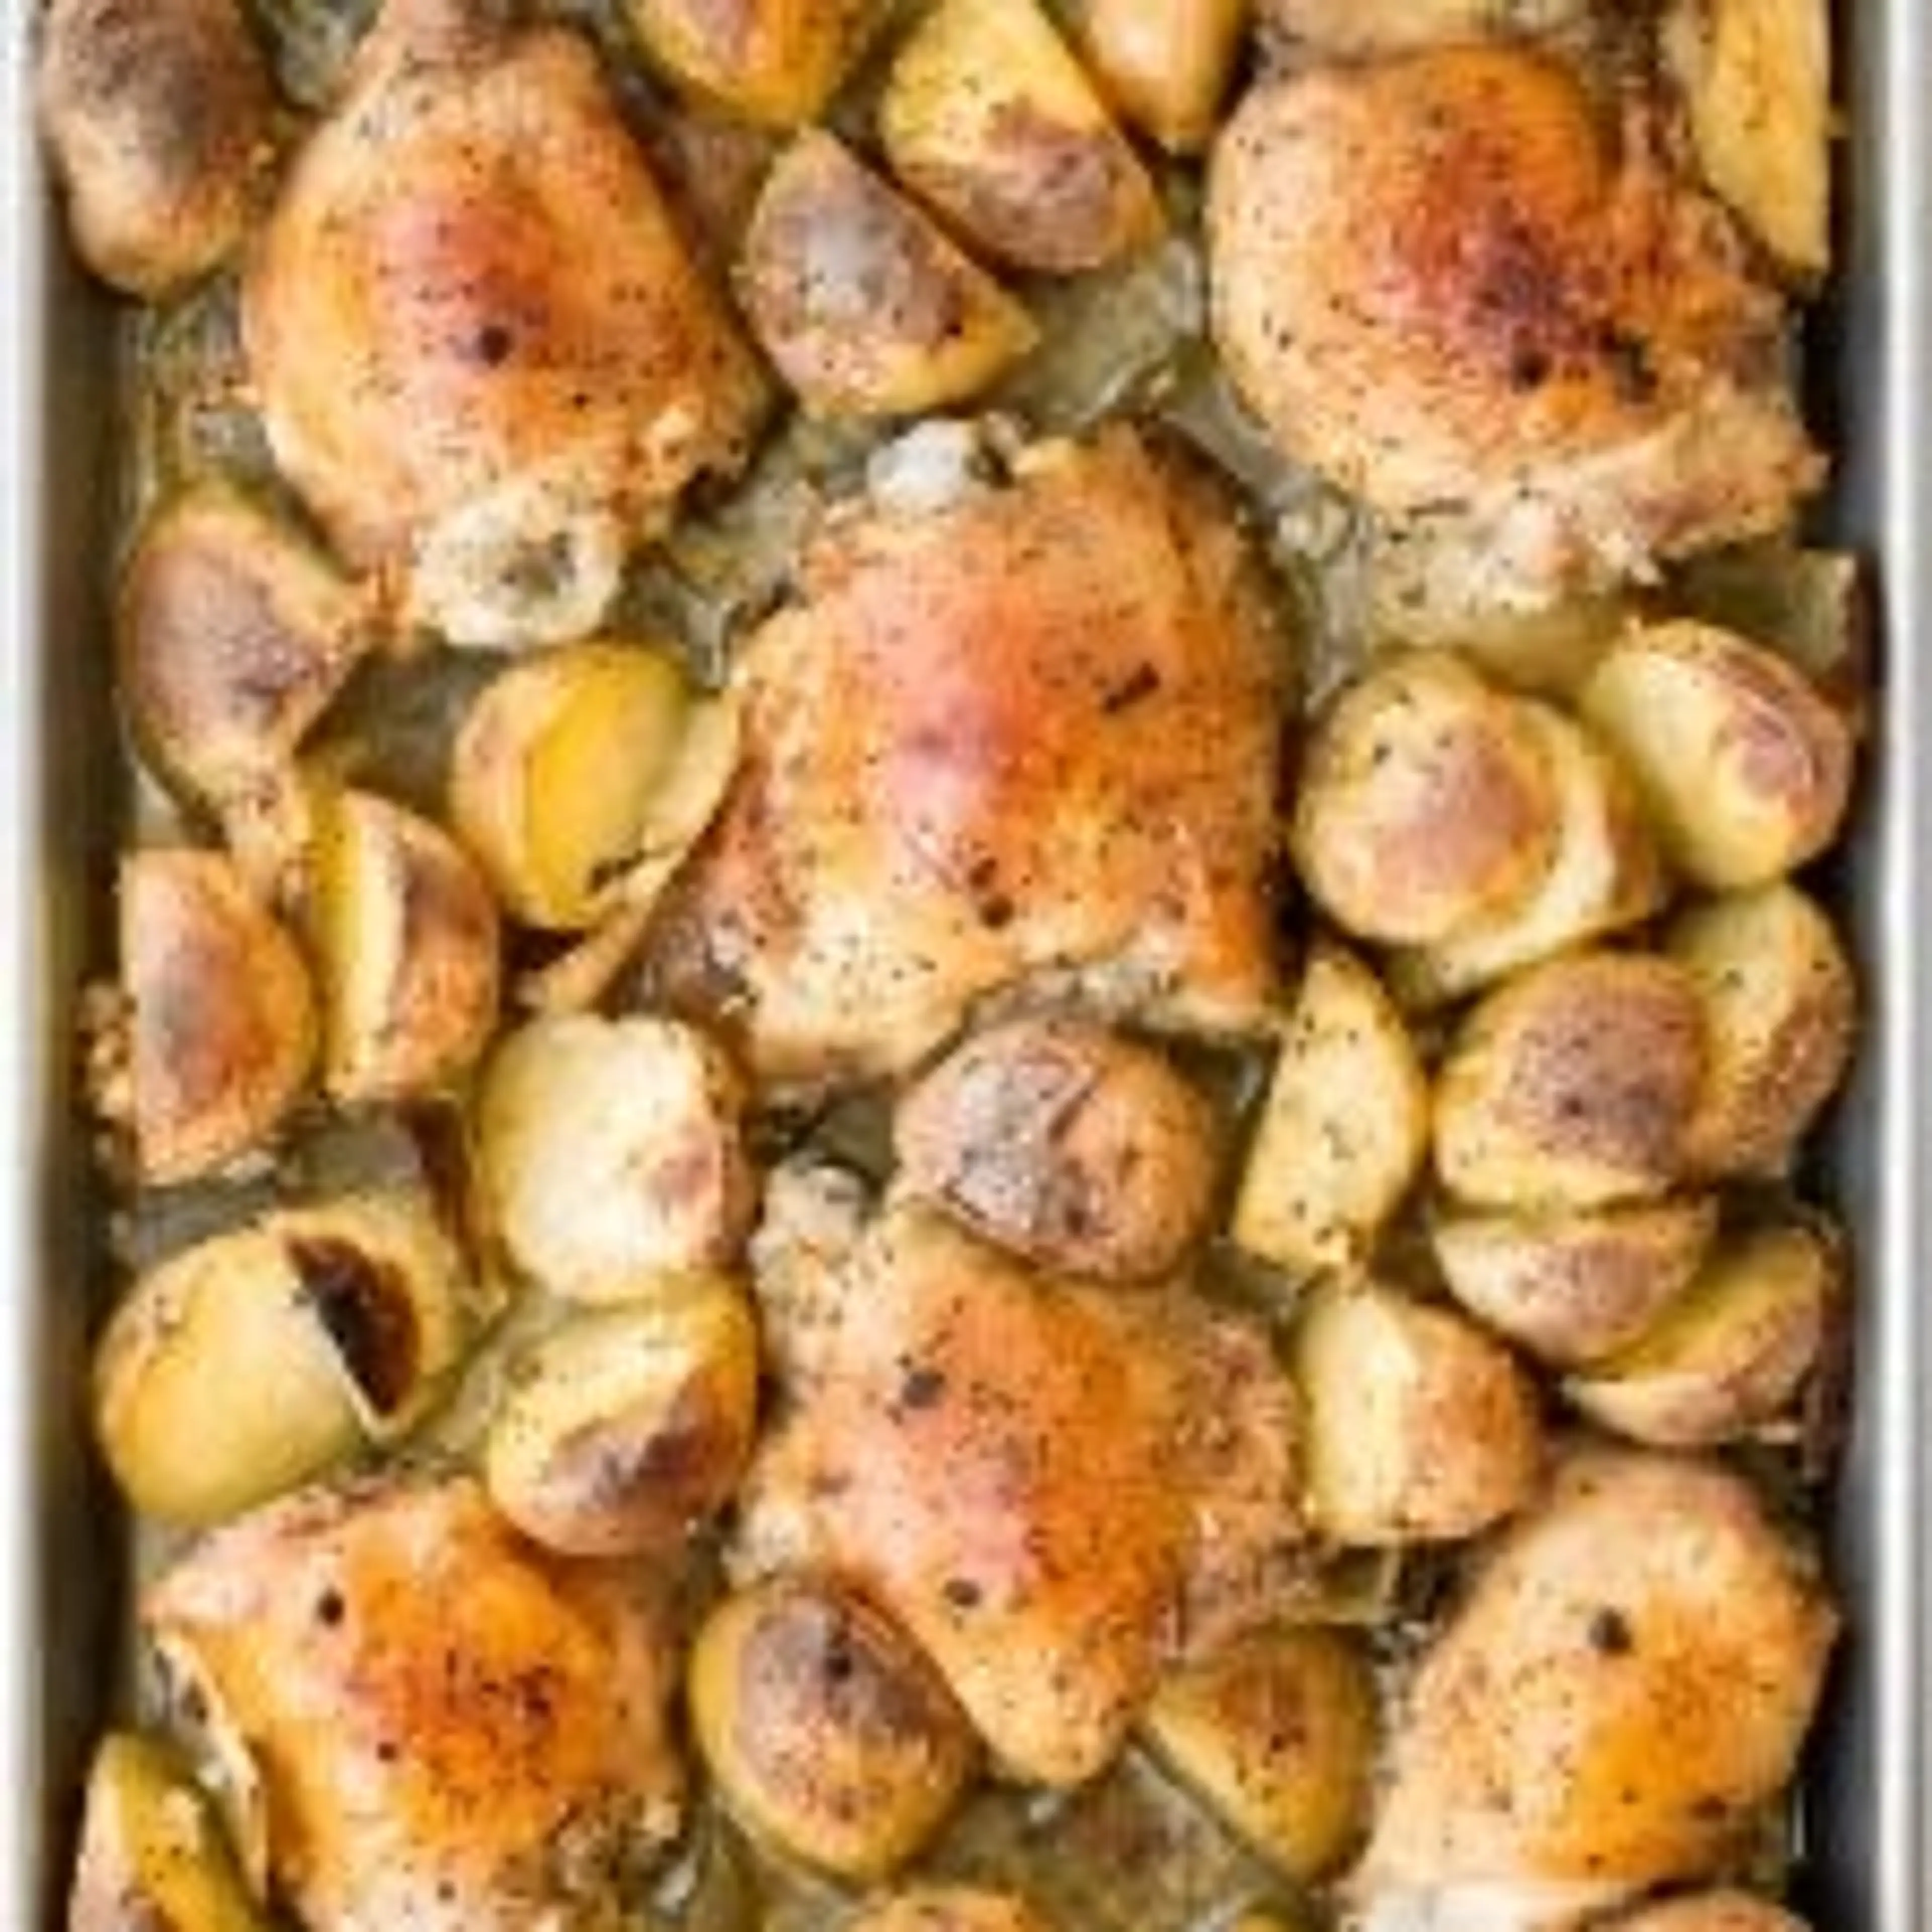 One Pan Garlic Roasted Chicken and Baby Potatoes